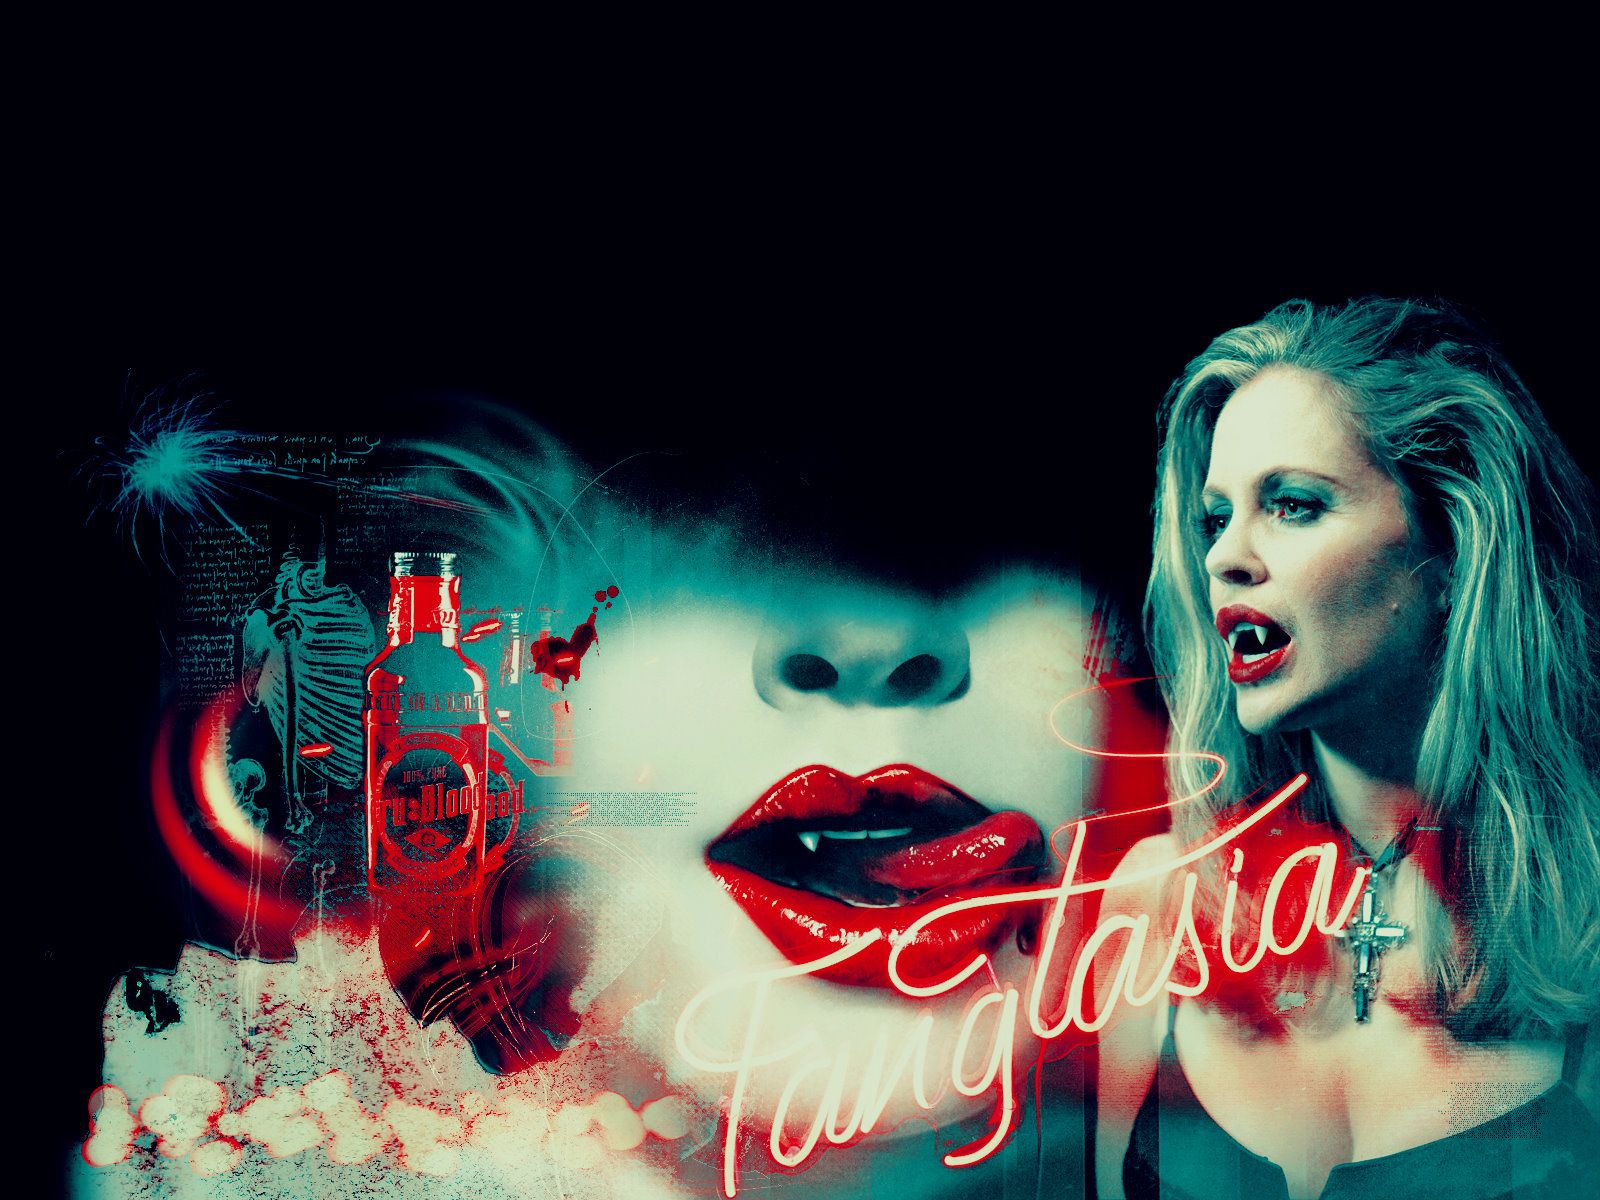 True Blood Wallpaper by haunted passion on DeviantArt